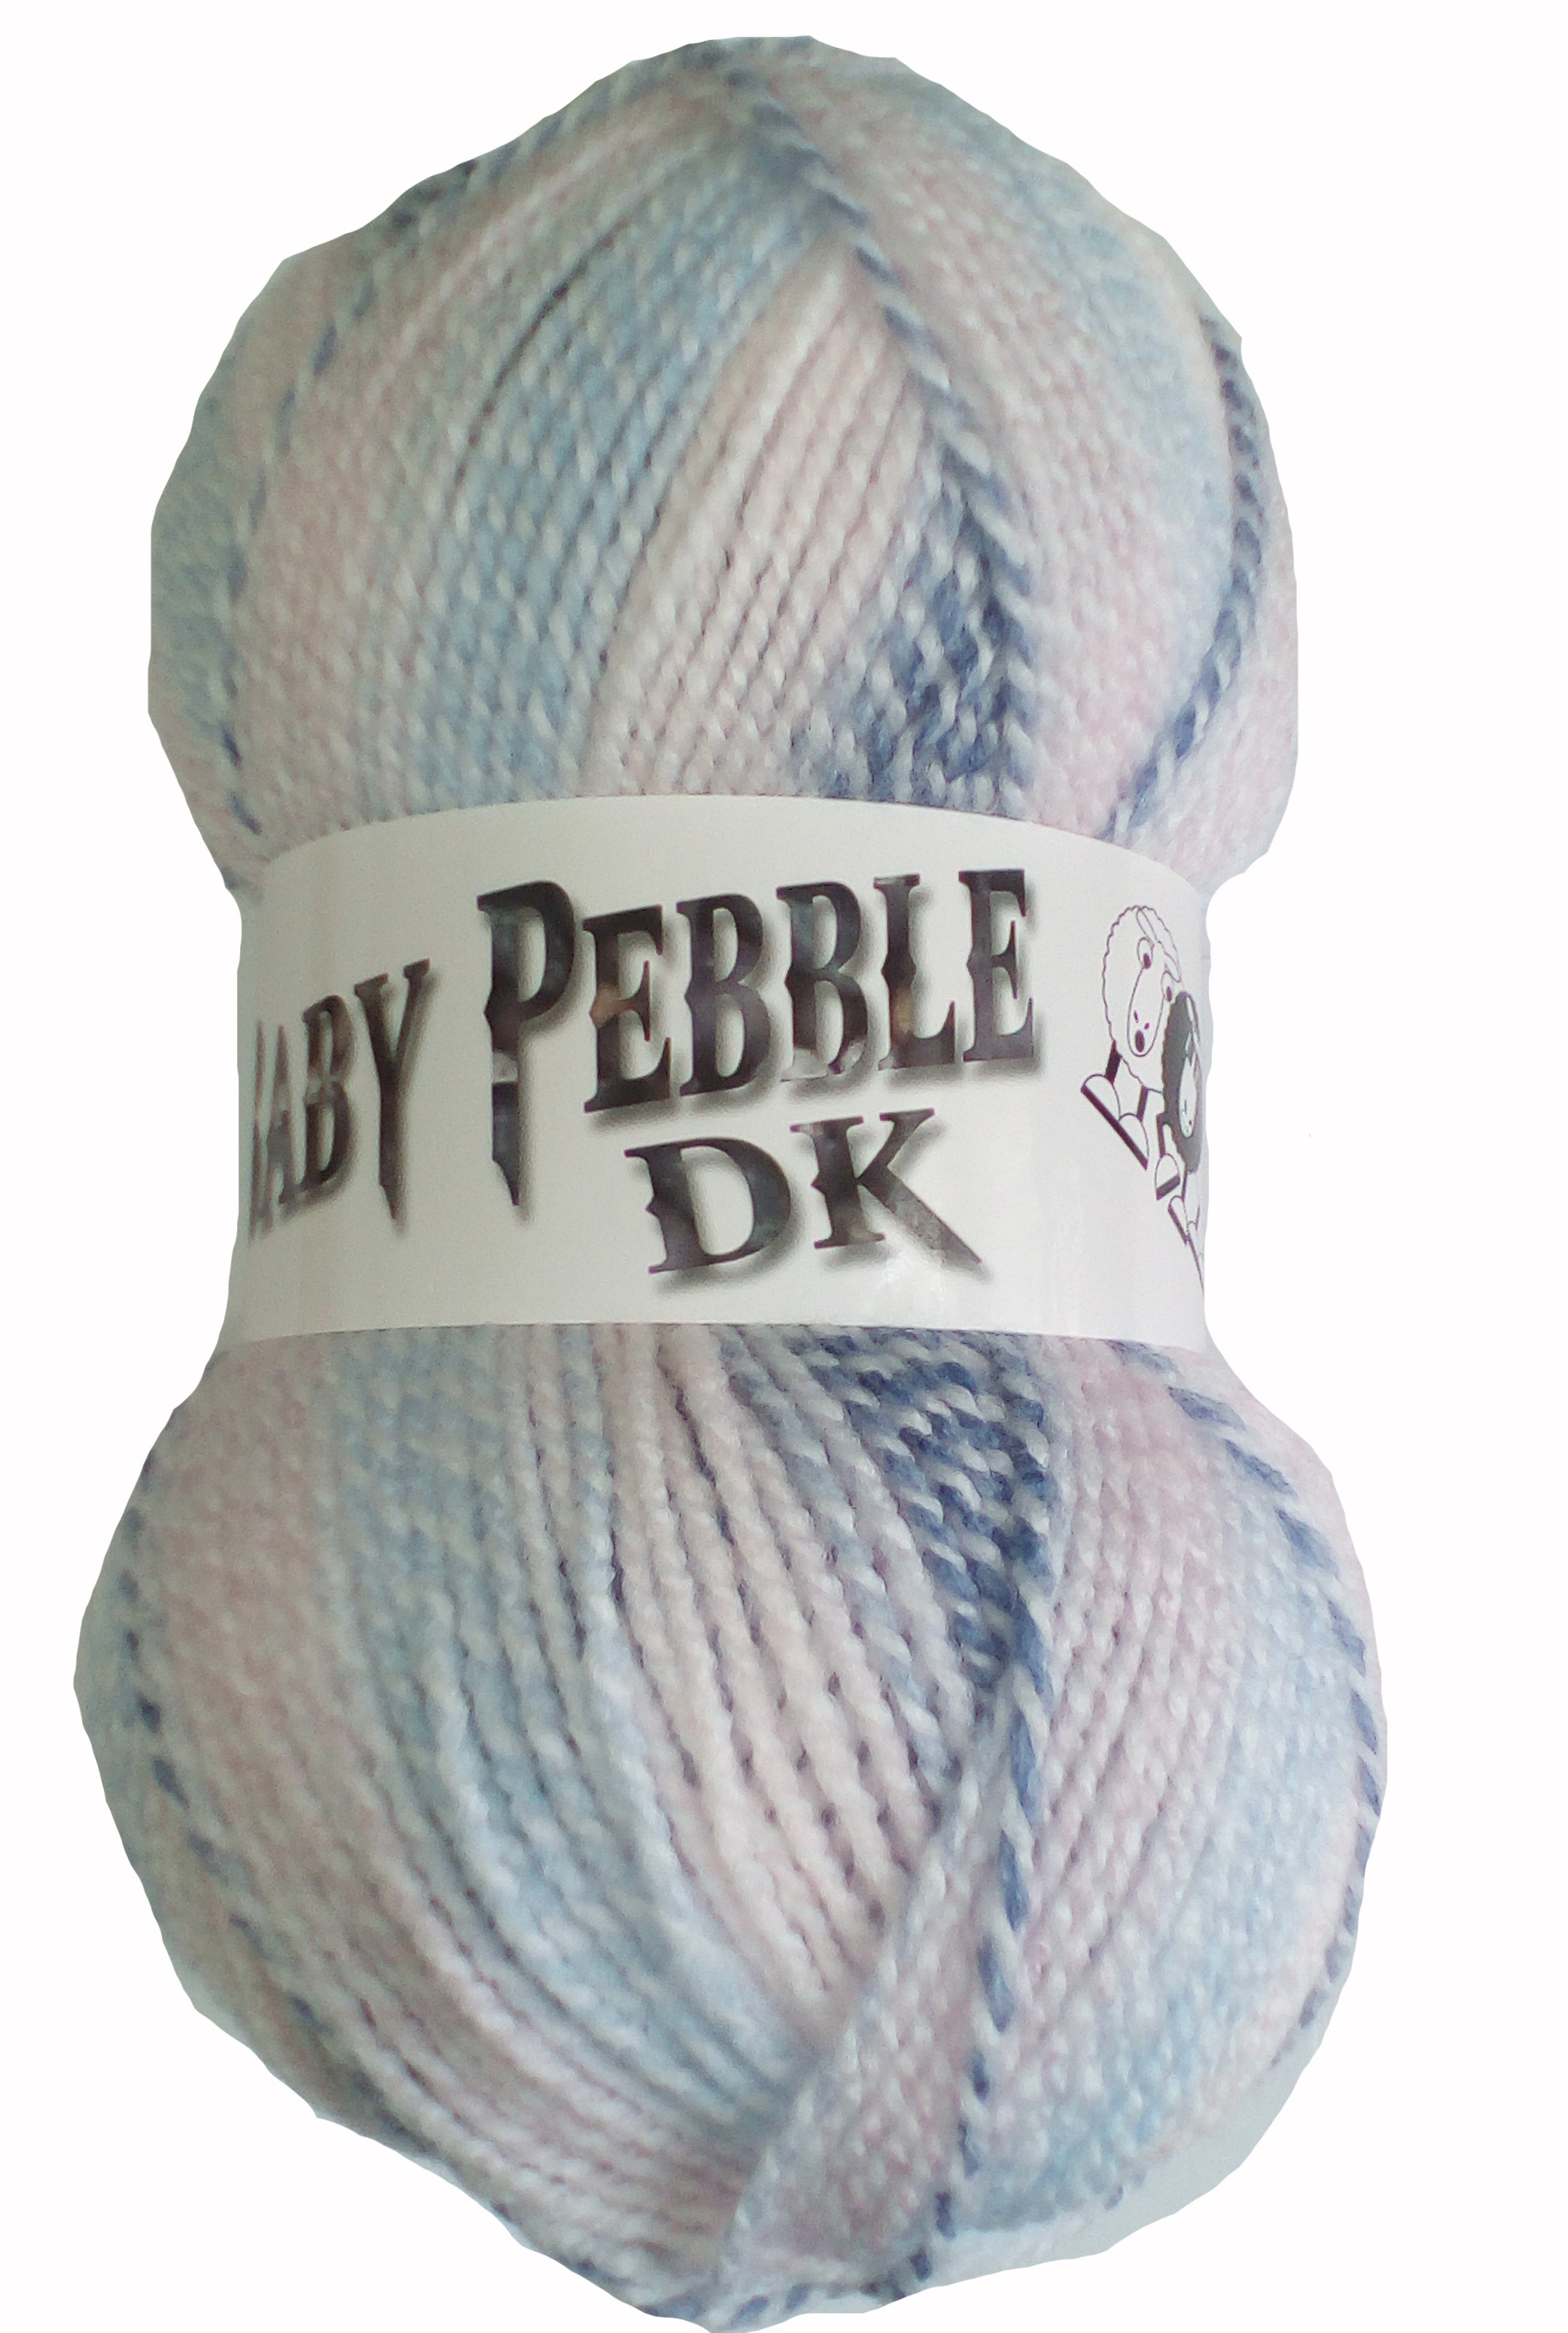 Baby Pebble 10x100g Balls Flutter 103 - Click Image to Close